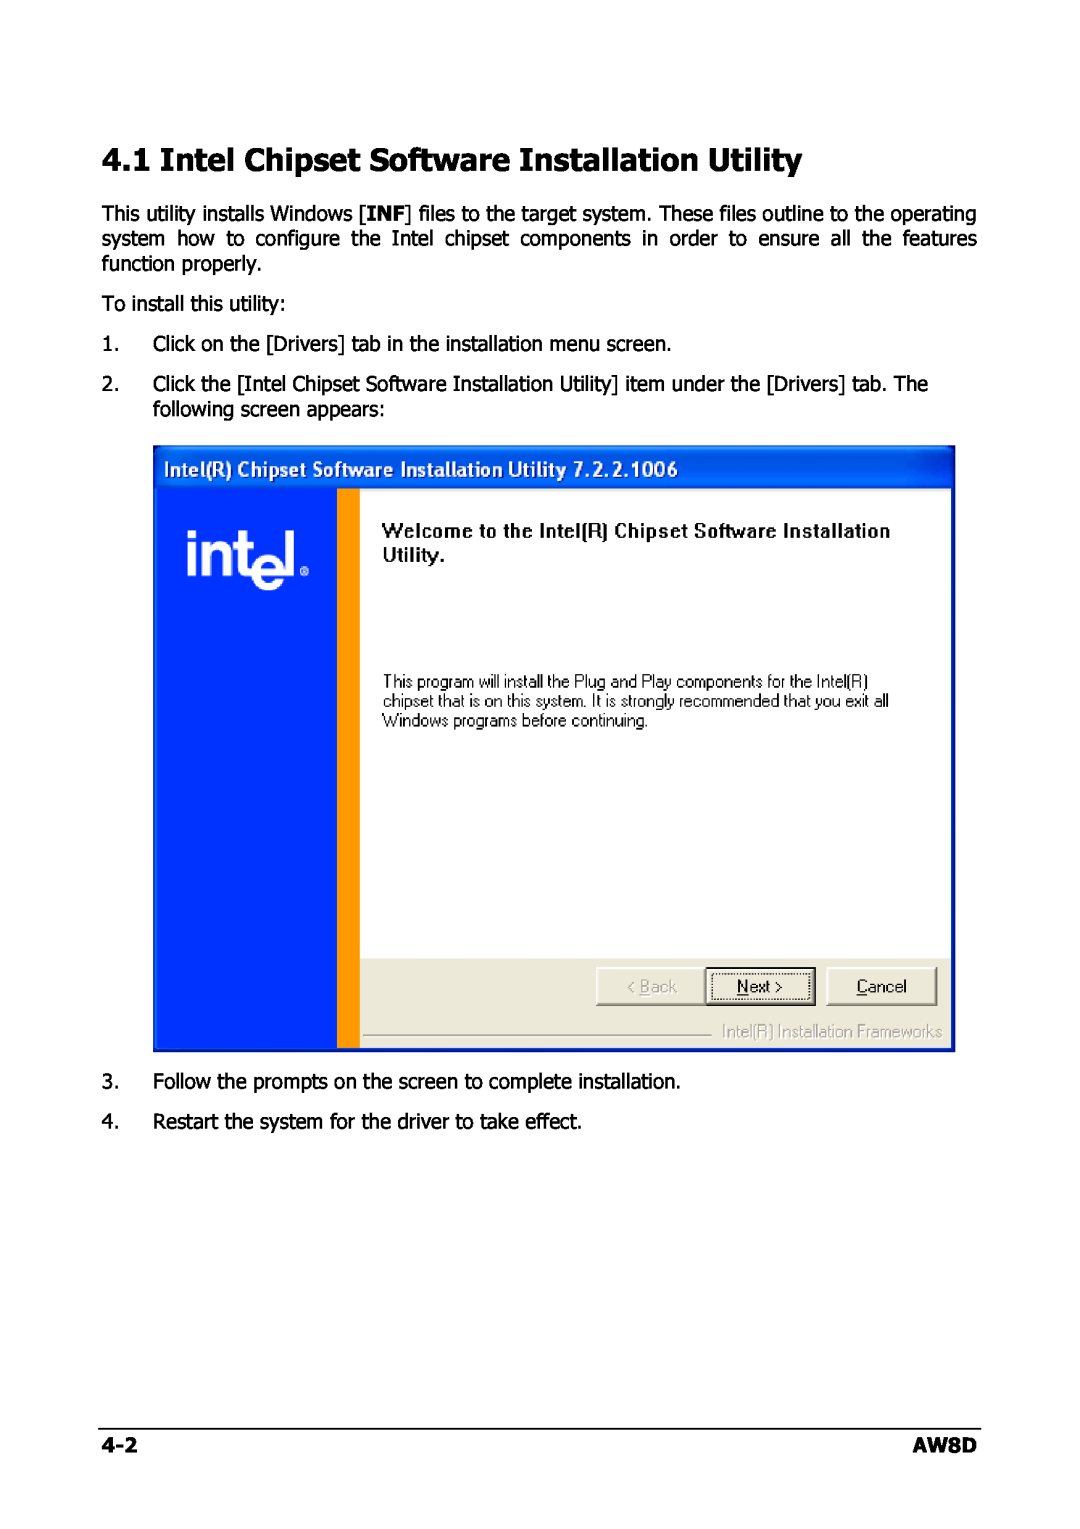 Intel AW8D user manual Intel Chipset Software Installation Utility 